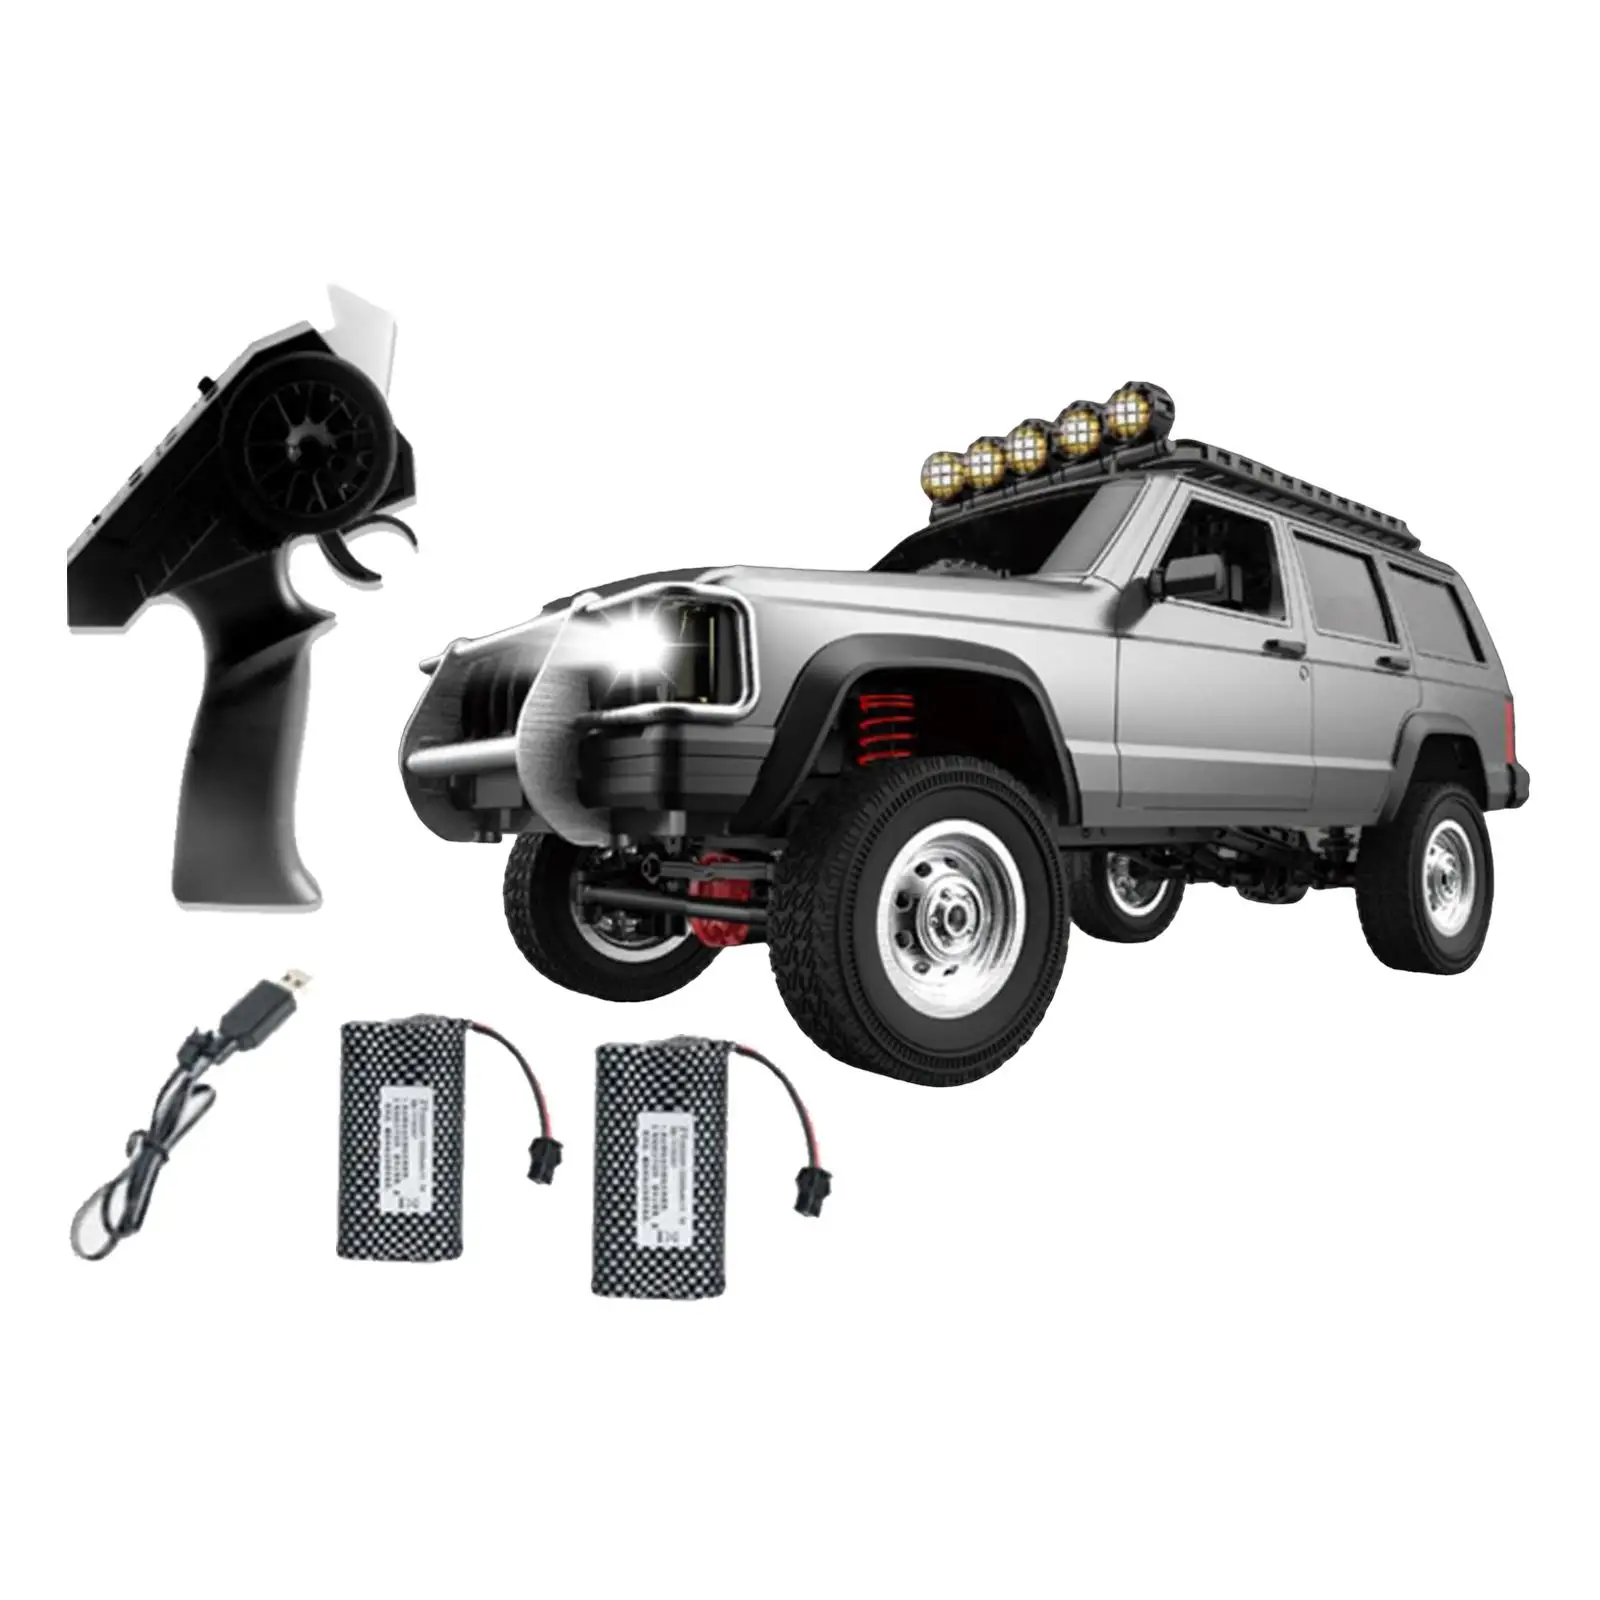 Huge 1:12 RC Car with Battery LED Headlight All Terrain Toy trucks Crawler Remote Control for Children Boys Adult